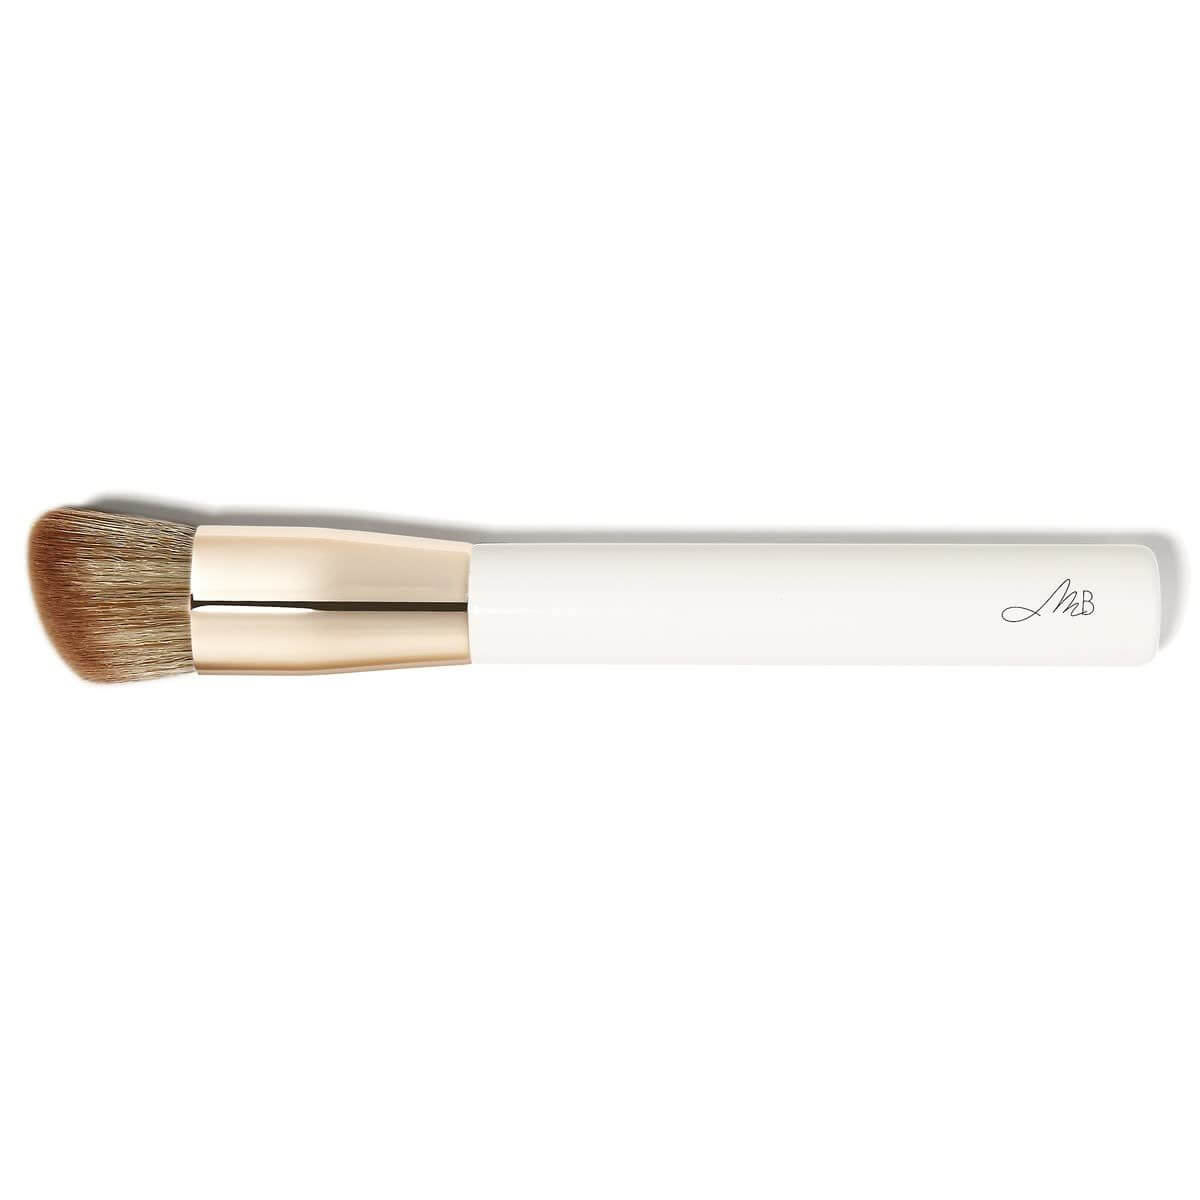 Call Your Buff Angled Brush - Monika Blunder Beauty - Custom-Sculpted Synthetic Buffing Brush